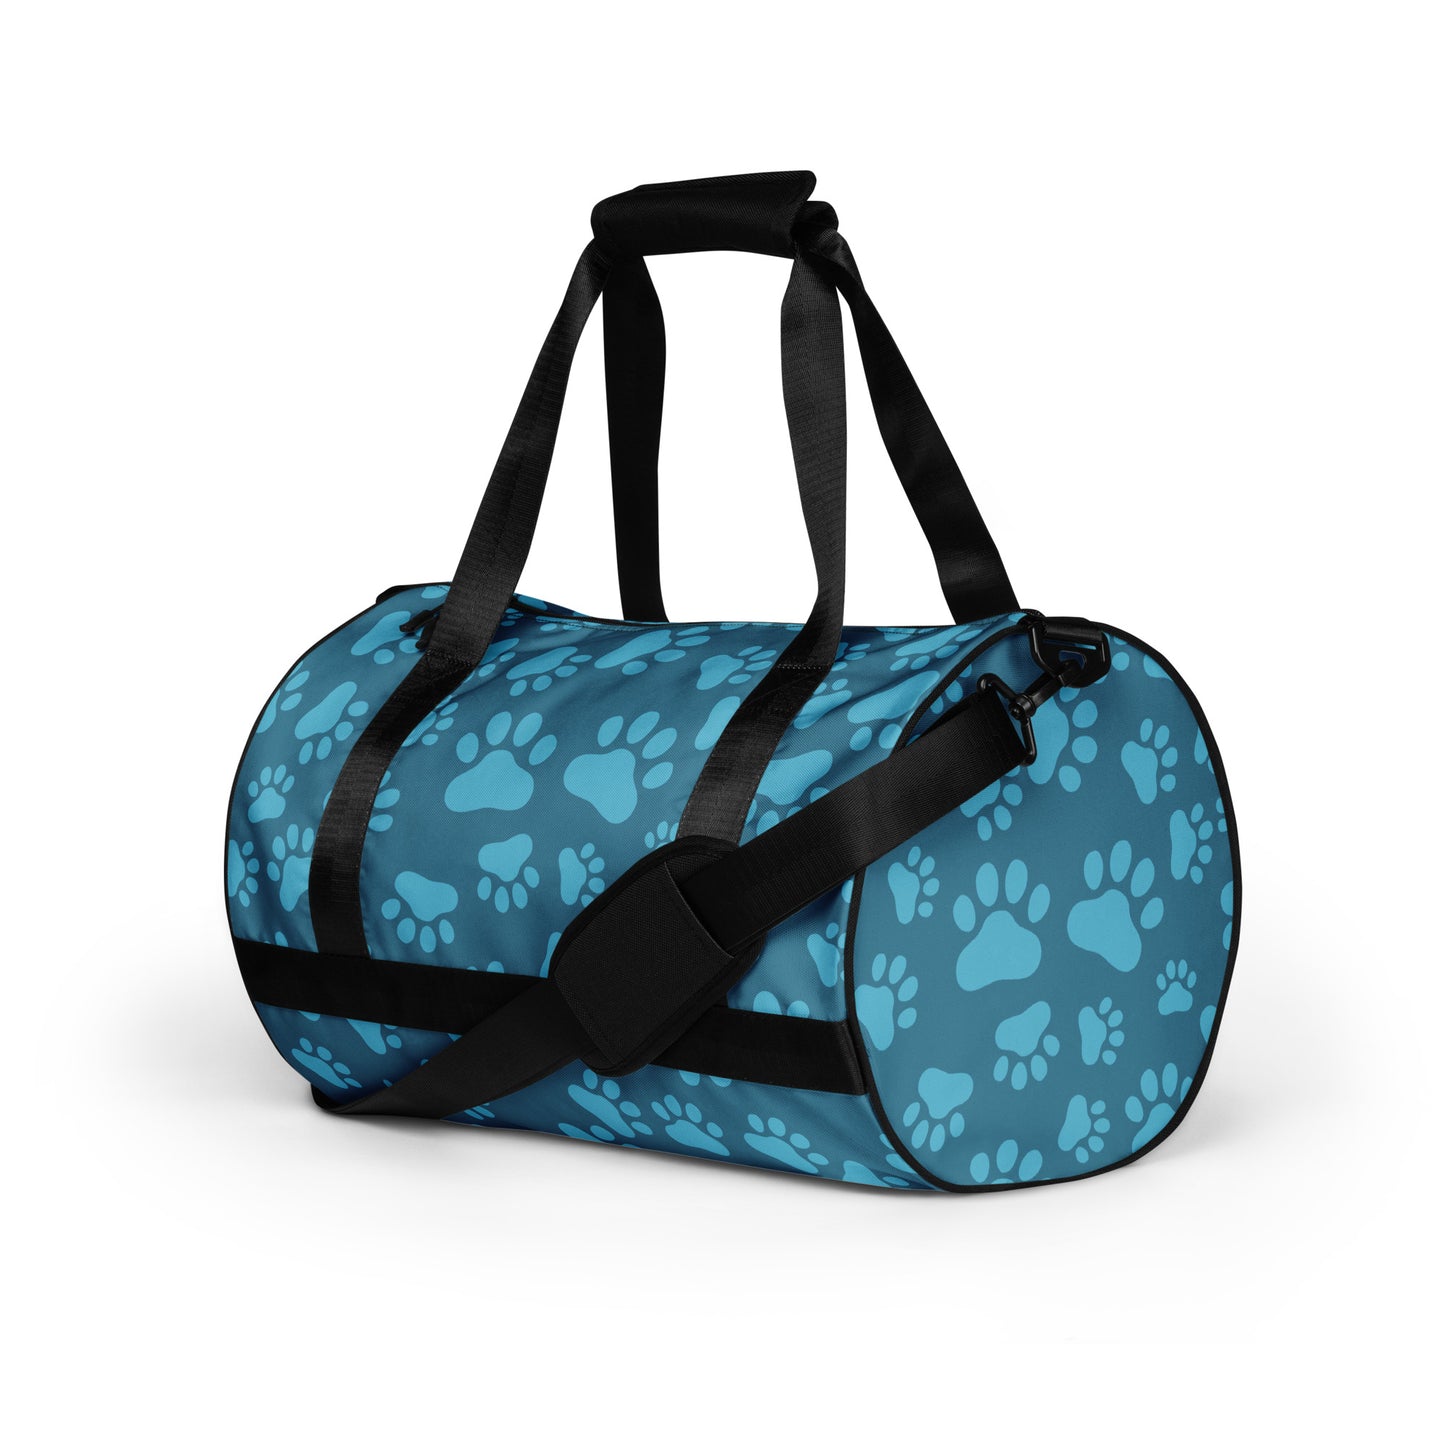 Turquoise Paw Print All-over print gym bag CedarHill Country Market